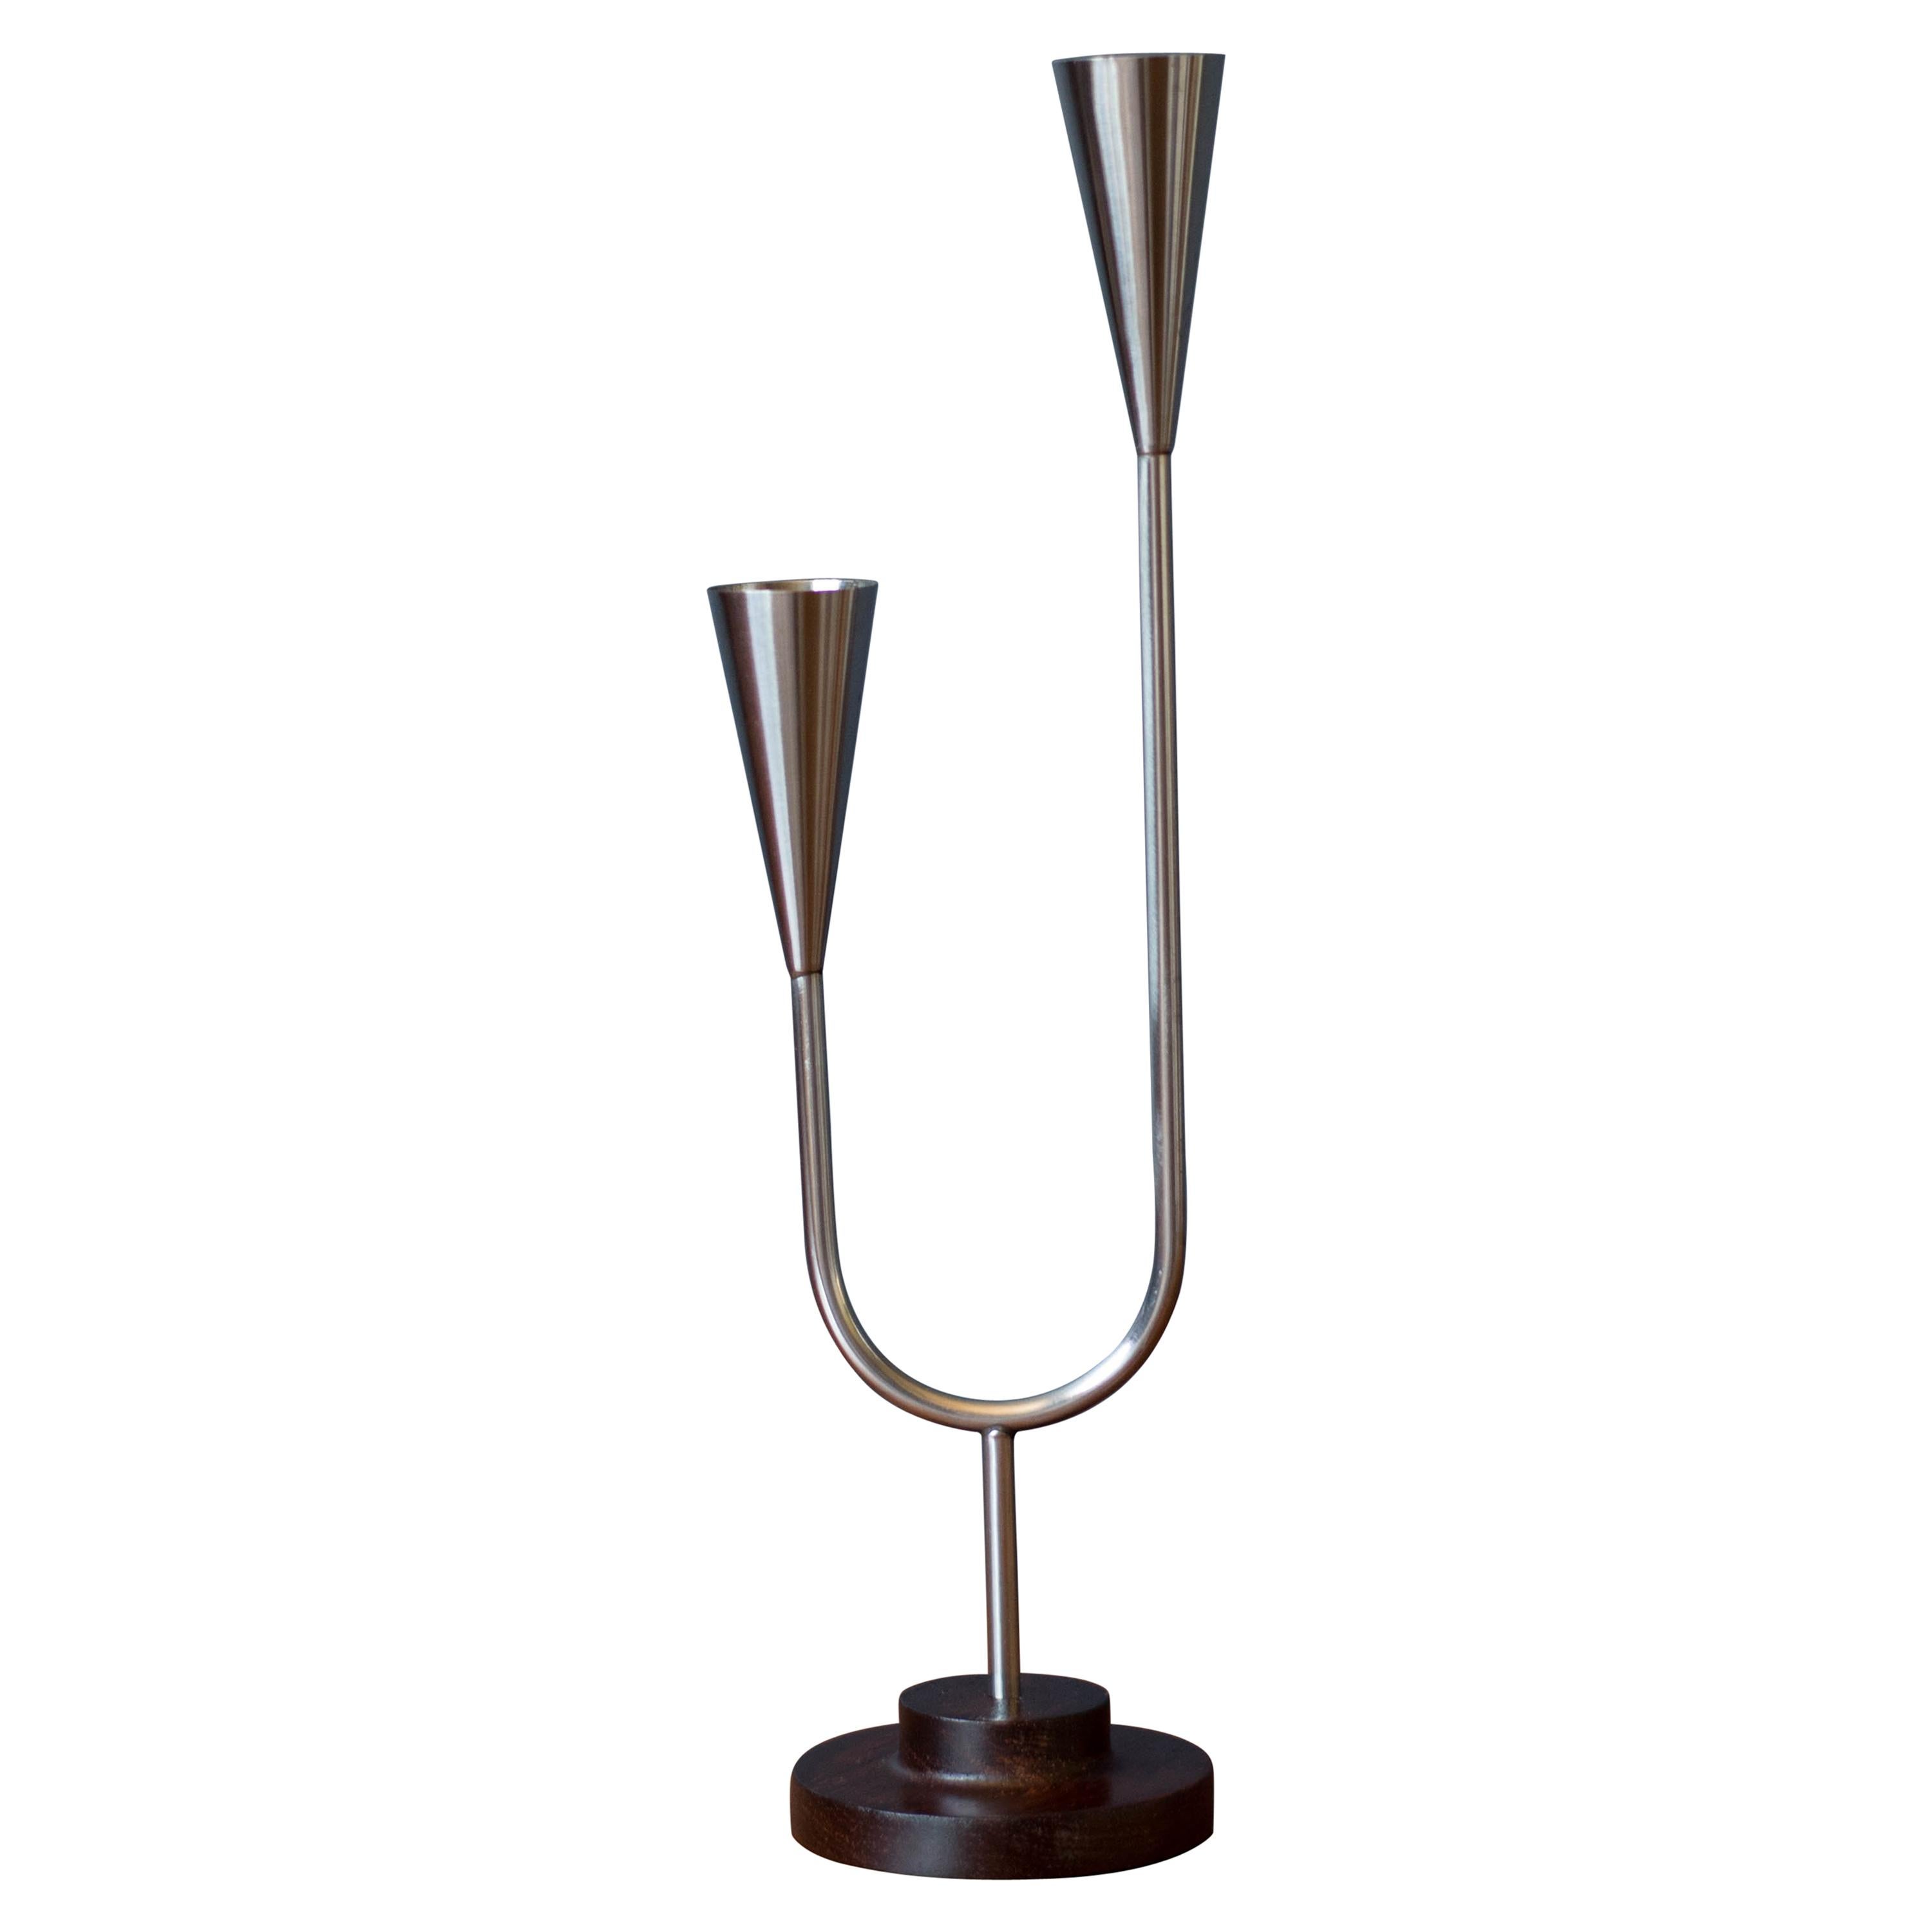 Danish Modern Lundtofte Rosewood and Stainless Steel Candle Holder